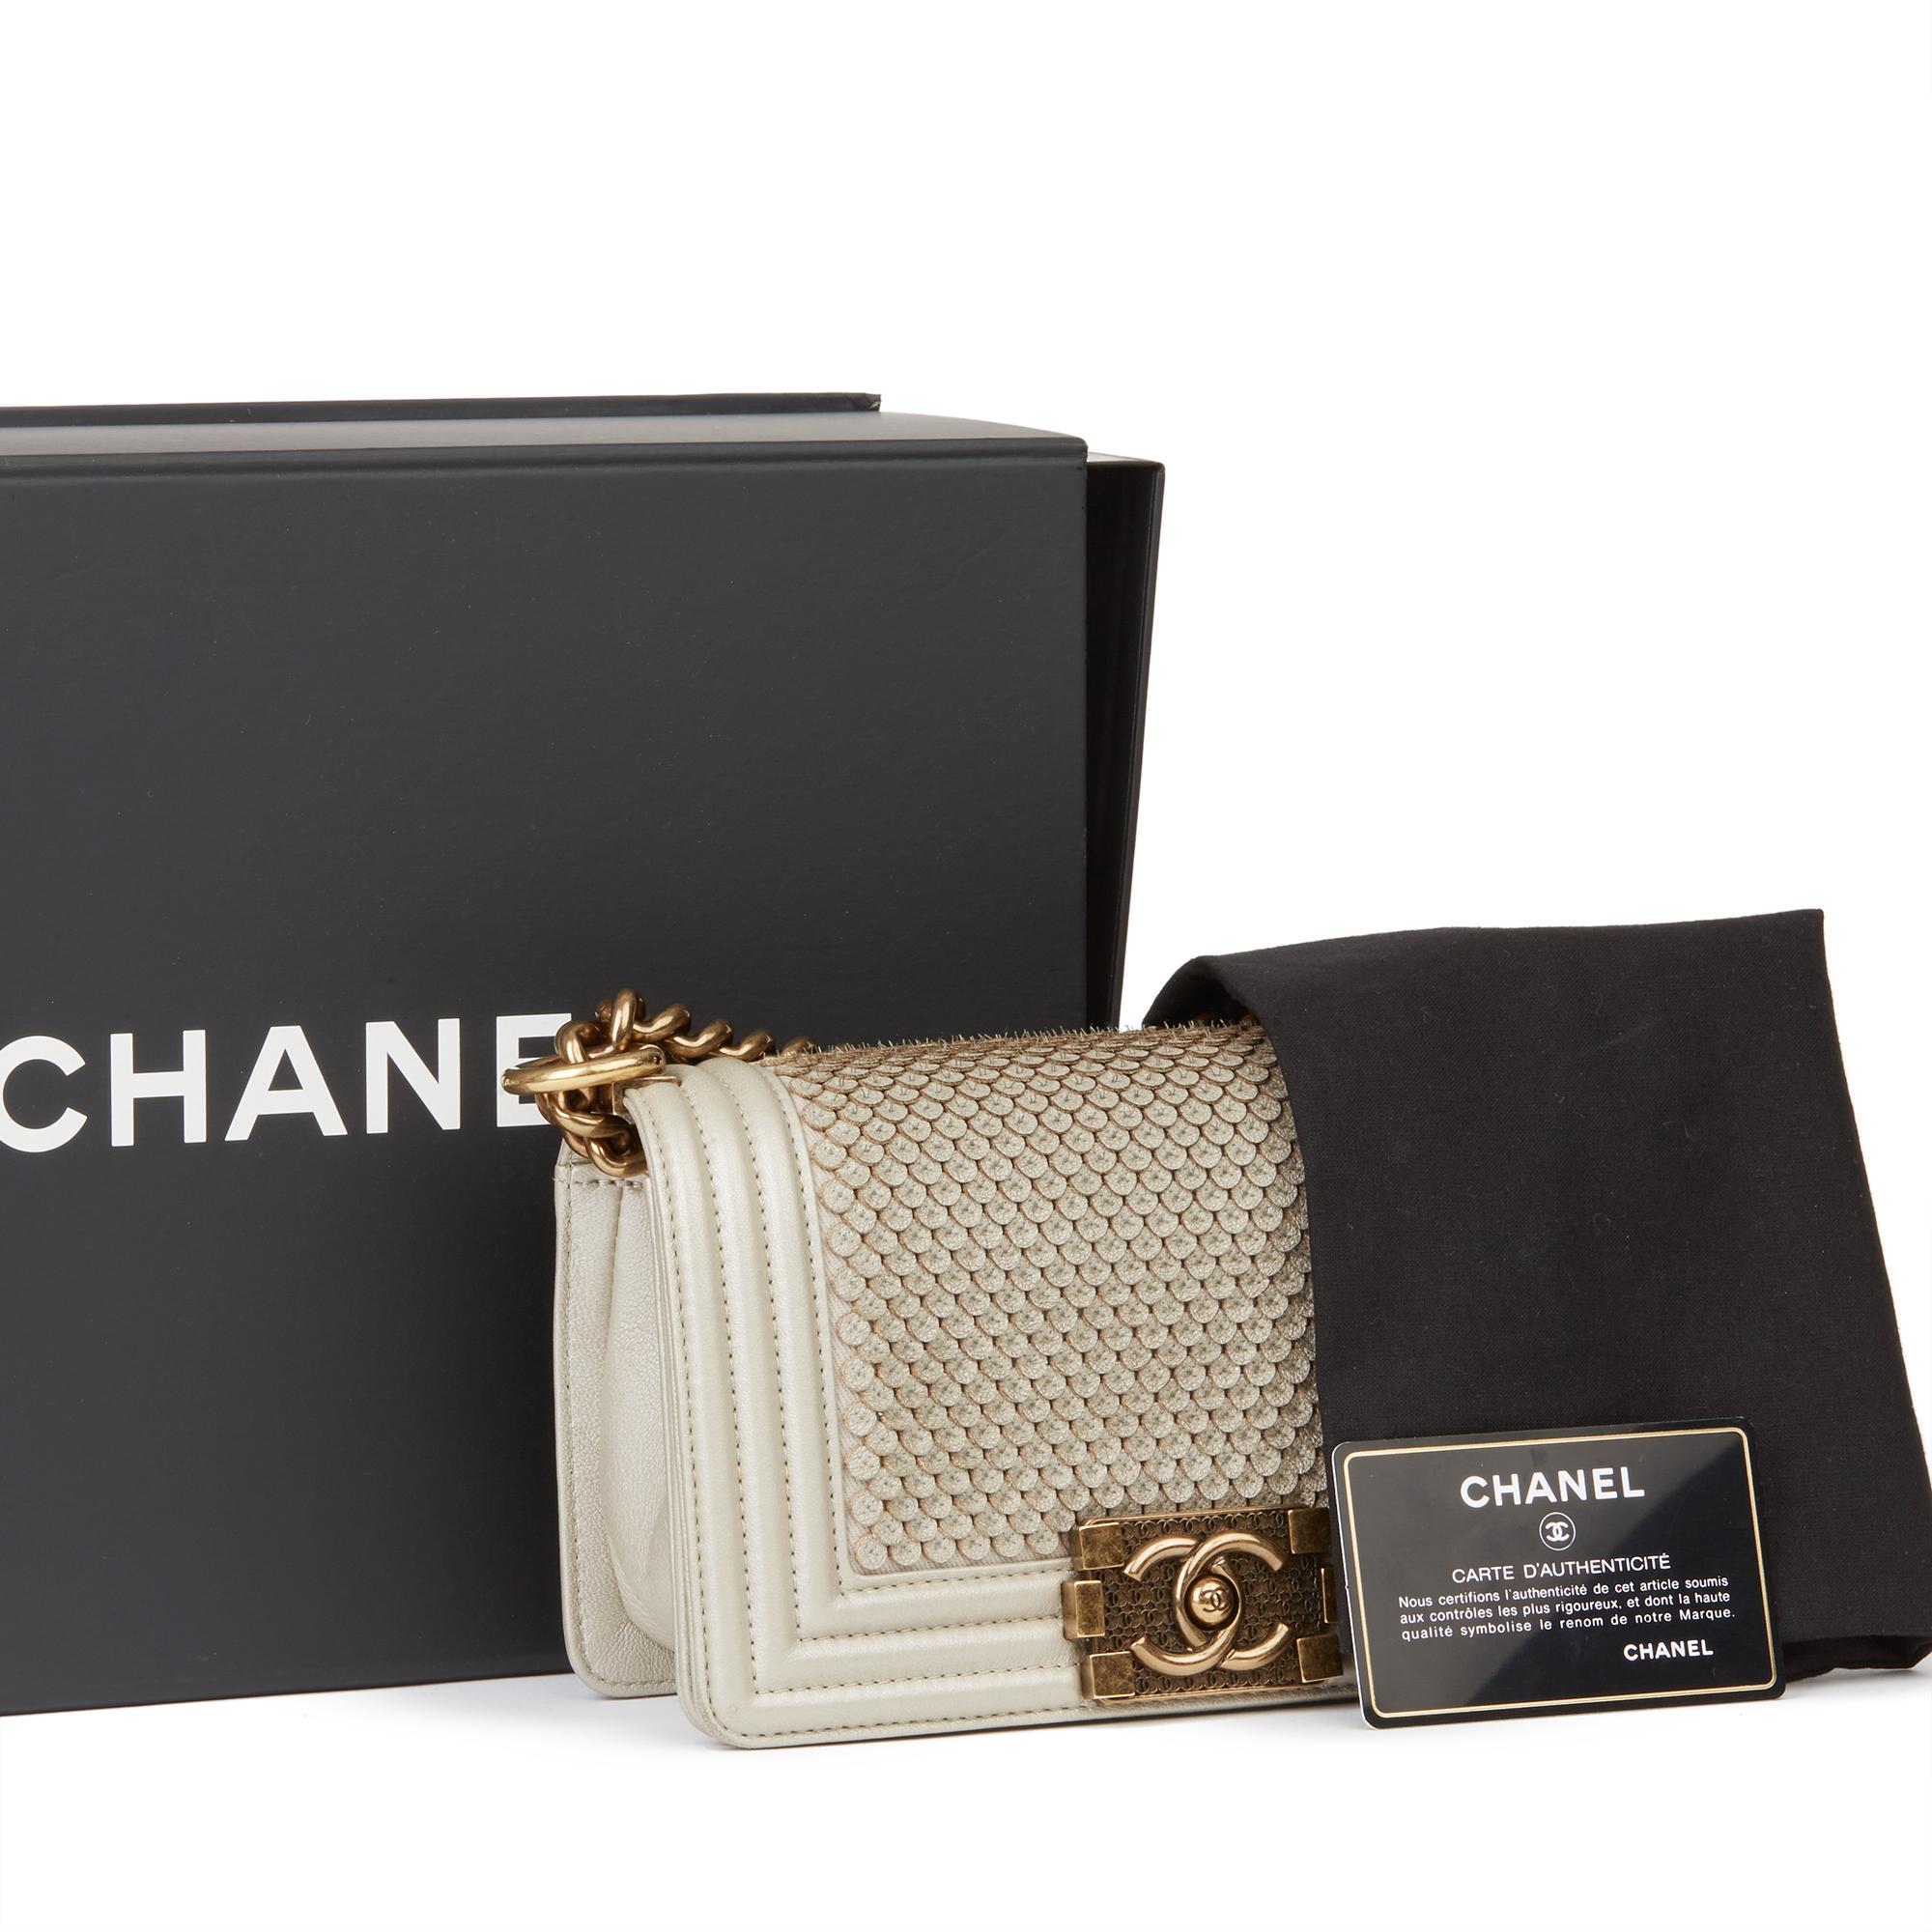 2015 Chanel Light Gold Scaled Metallic Calfskin Leather Small Le Boy 7